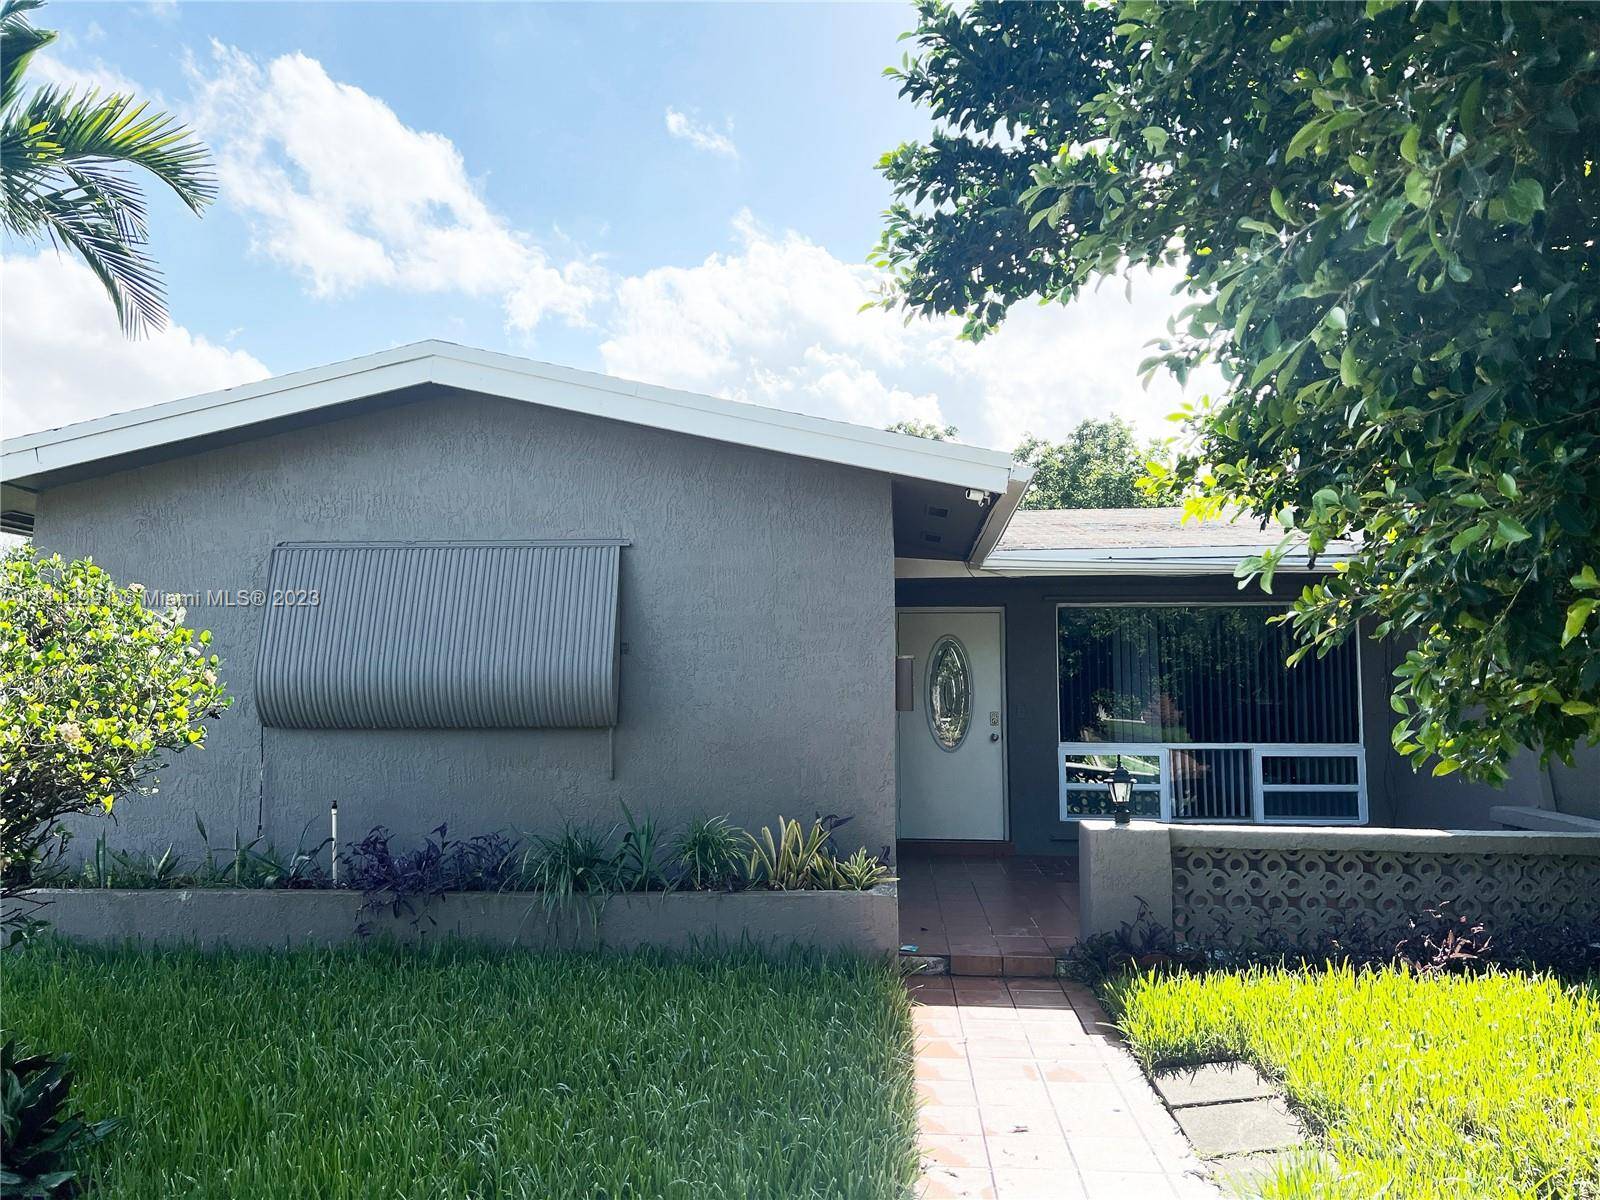 BEAUTIFULLY RENOVATED SINGLE FAMILY HOME IN HOLLYWOOD.